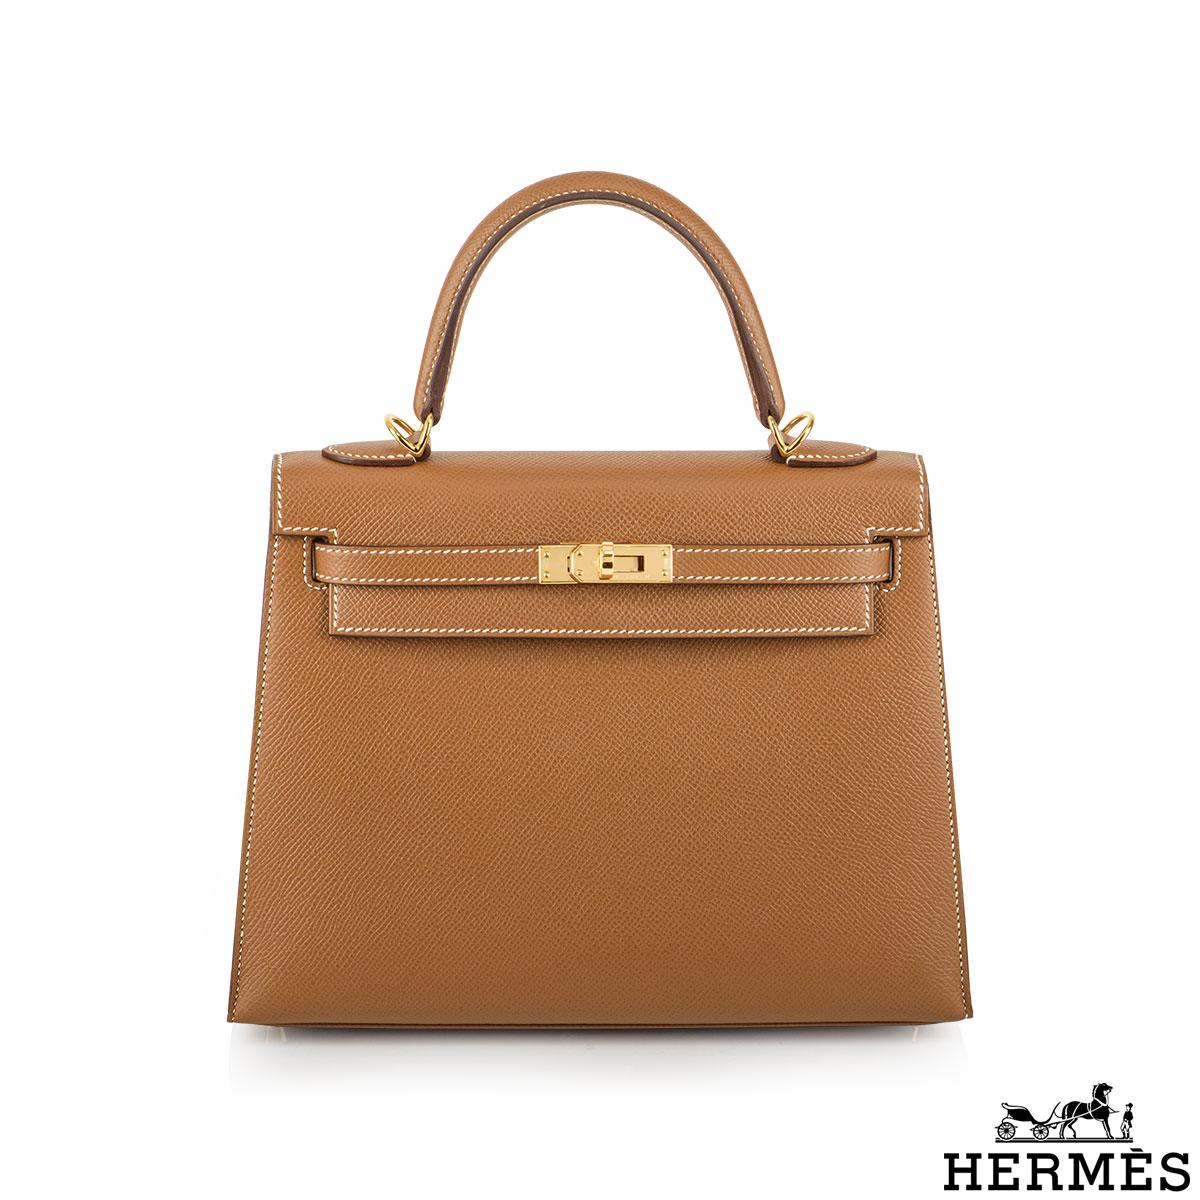 An exquisite Hermès 25cm Kelly bag. The exterior of this Kelly features a sellier style in gold epsom leather. The gold epsom leather is complemented with gold hardware and tonal stitchings. It features a front toggle closure with two straps,